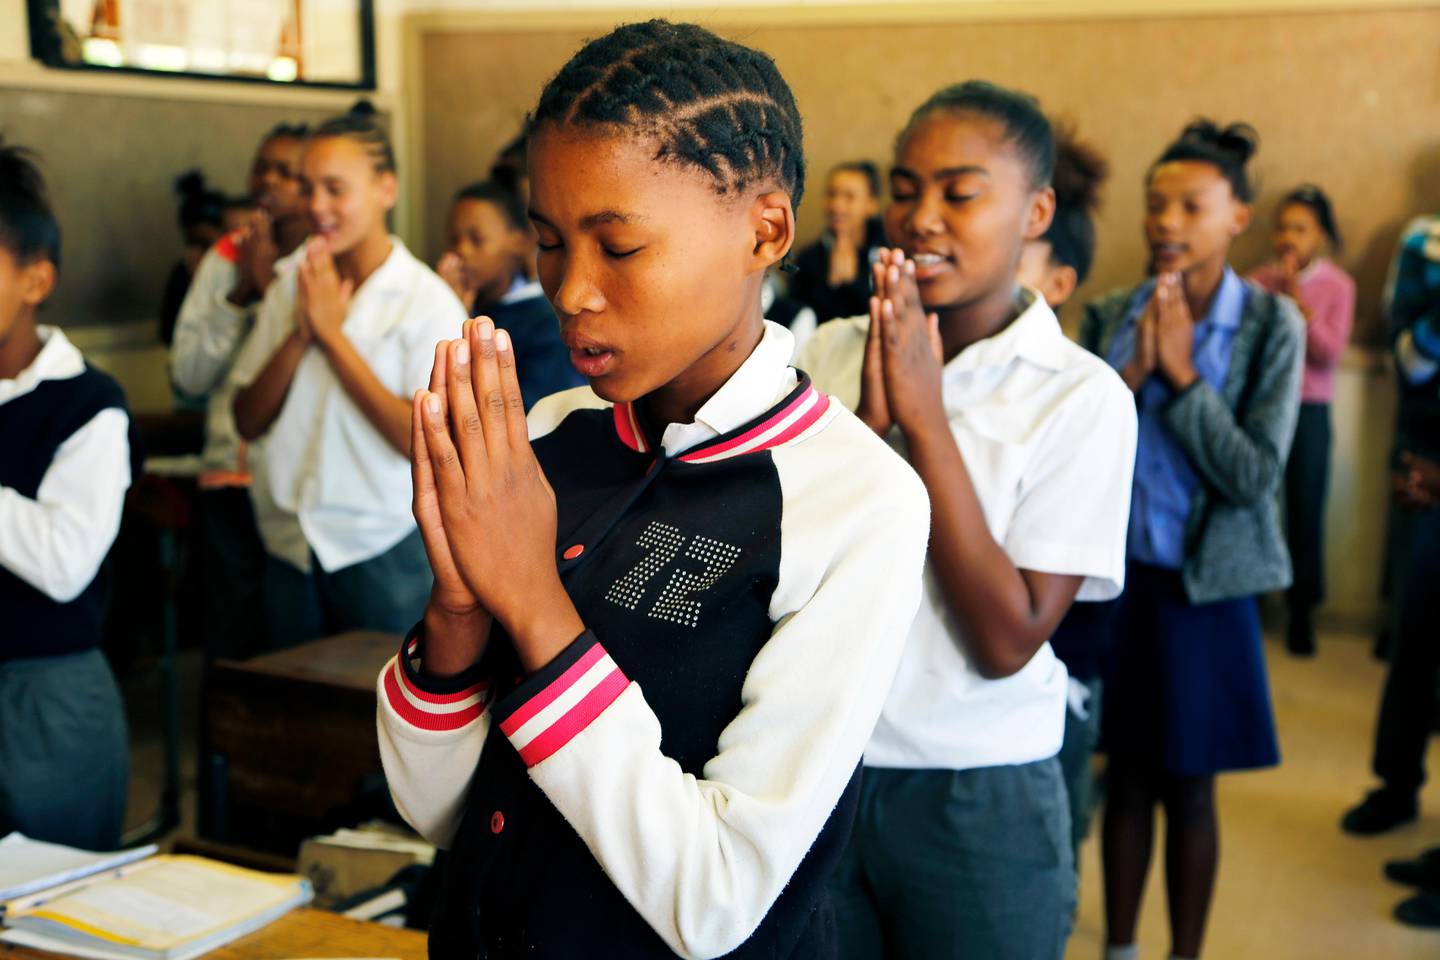 In this photo taken on Thursday, Nov. 14, 2019, children say grace before receiving their food which they are about to receive at the Delta Primary School in Vosburg, South Africa. The worst drought some farmers have seen in decades is affecting much of southern Africa. The United Nations says more than 11 million people now face crisis levels of food insecurity. (AP Photo/Denis Farrell)